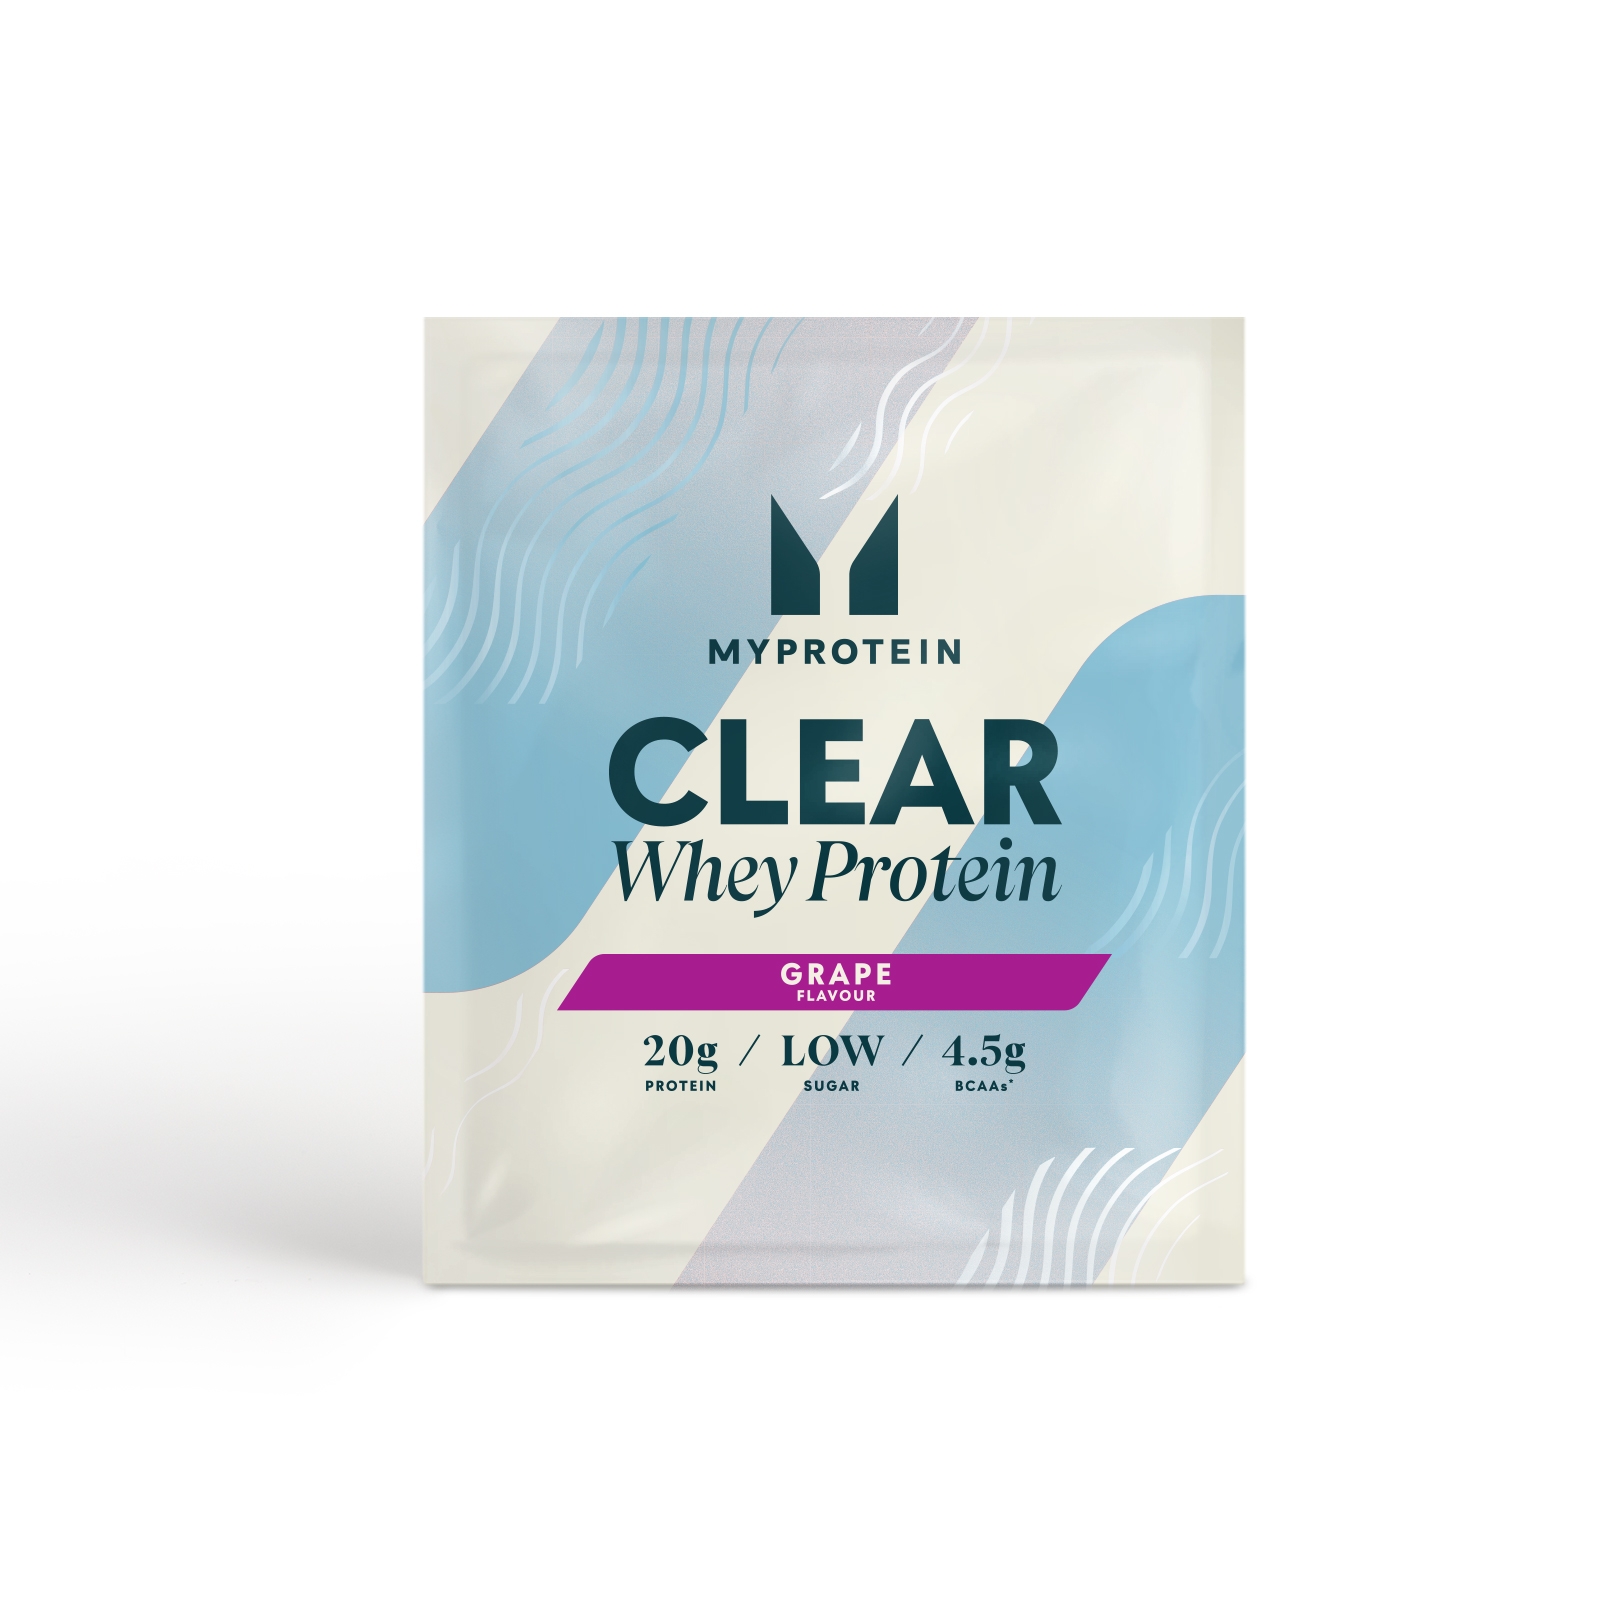 E-shop Myprotein Clear Whey Isolate (Sample) - 1servings - Grape